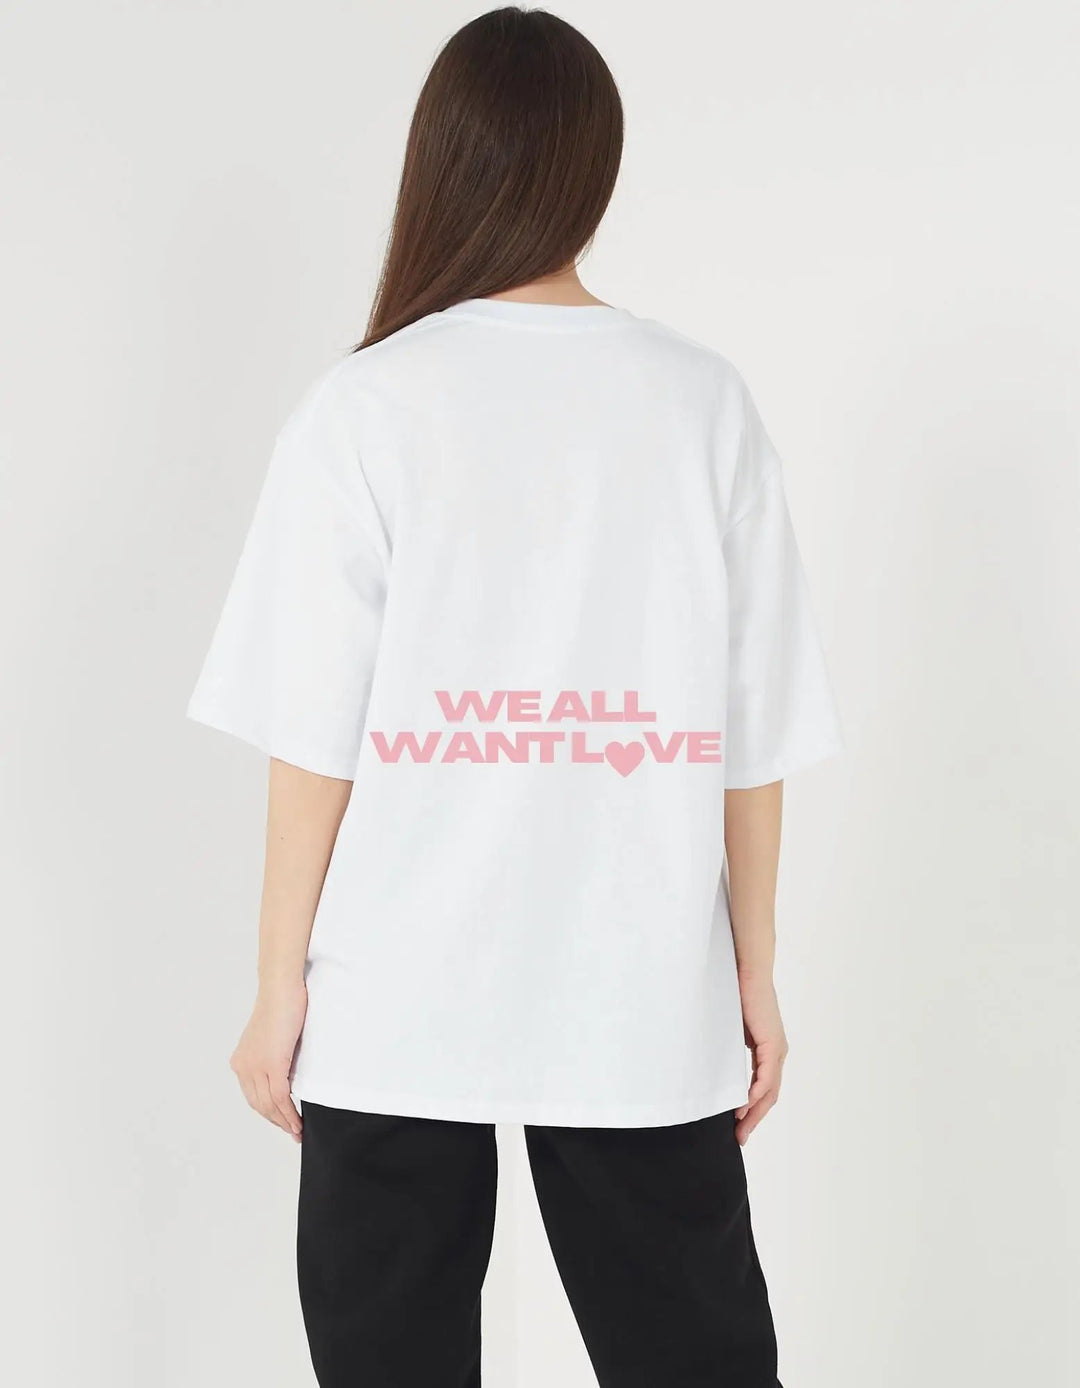 We all want love Oversized Shirt